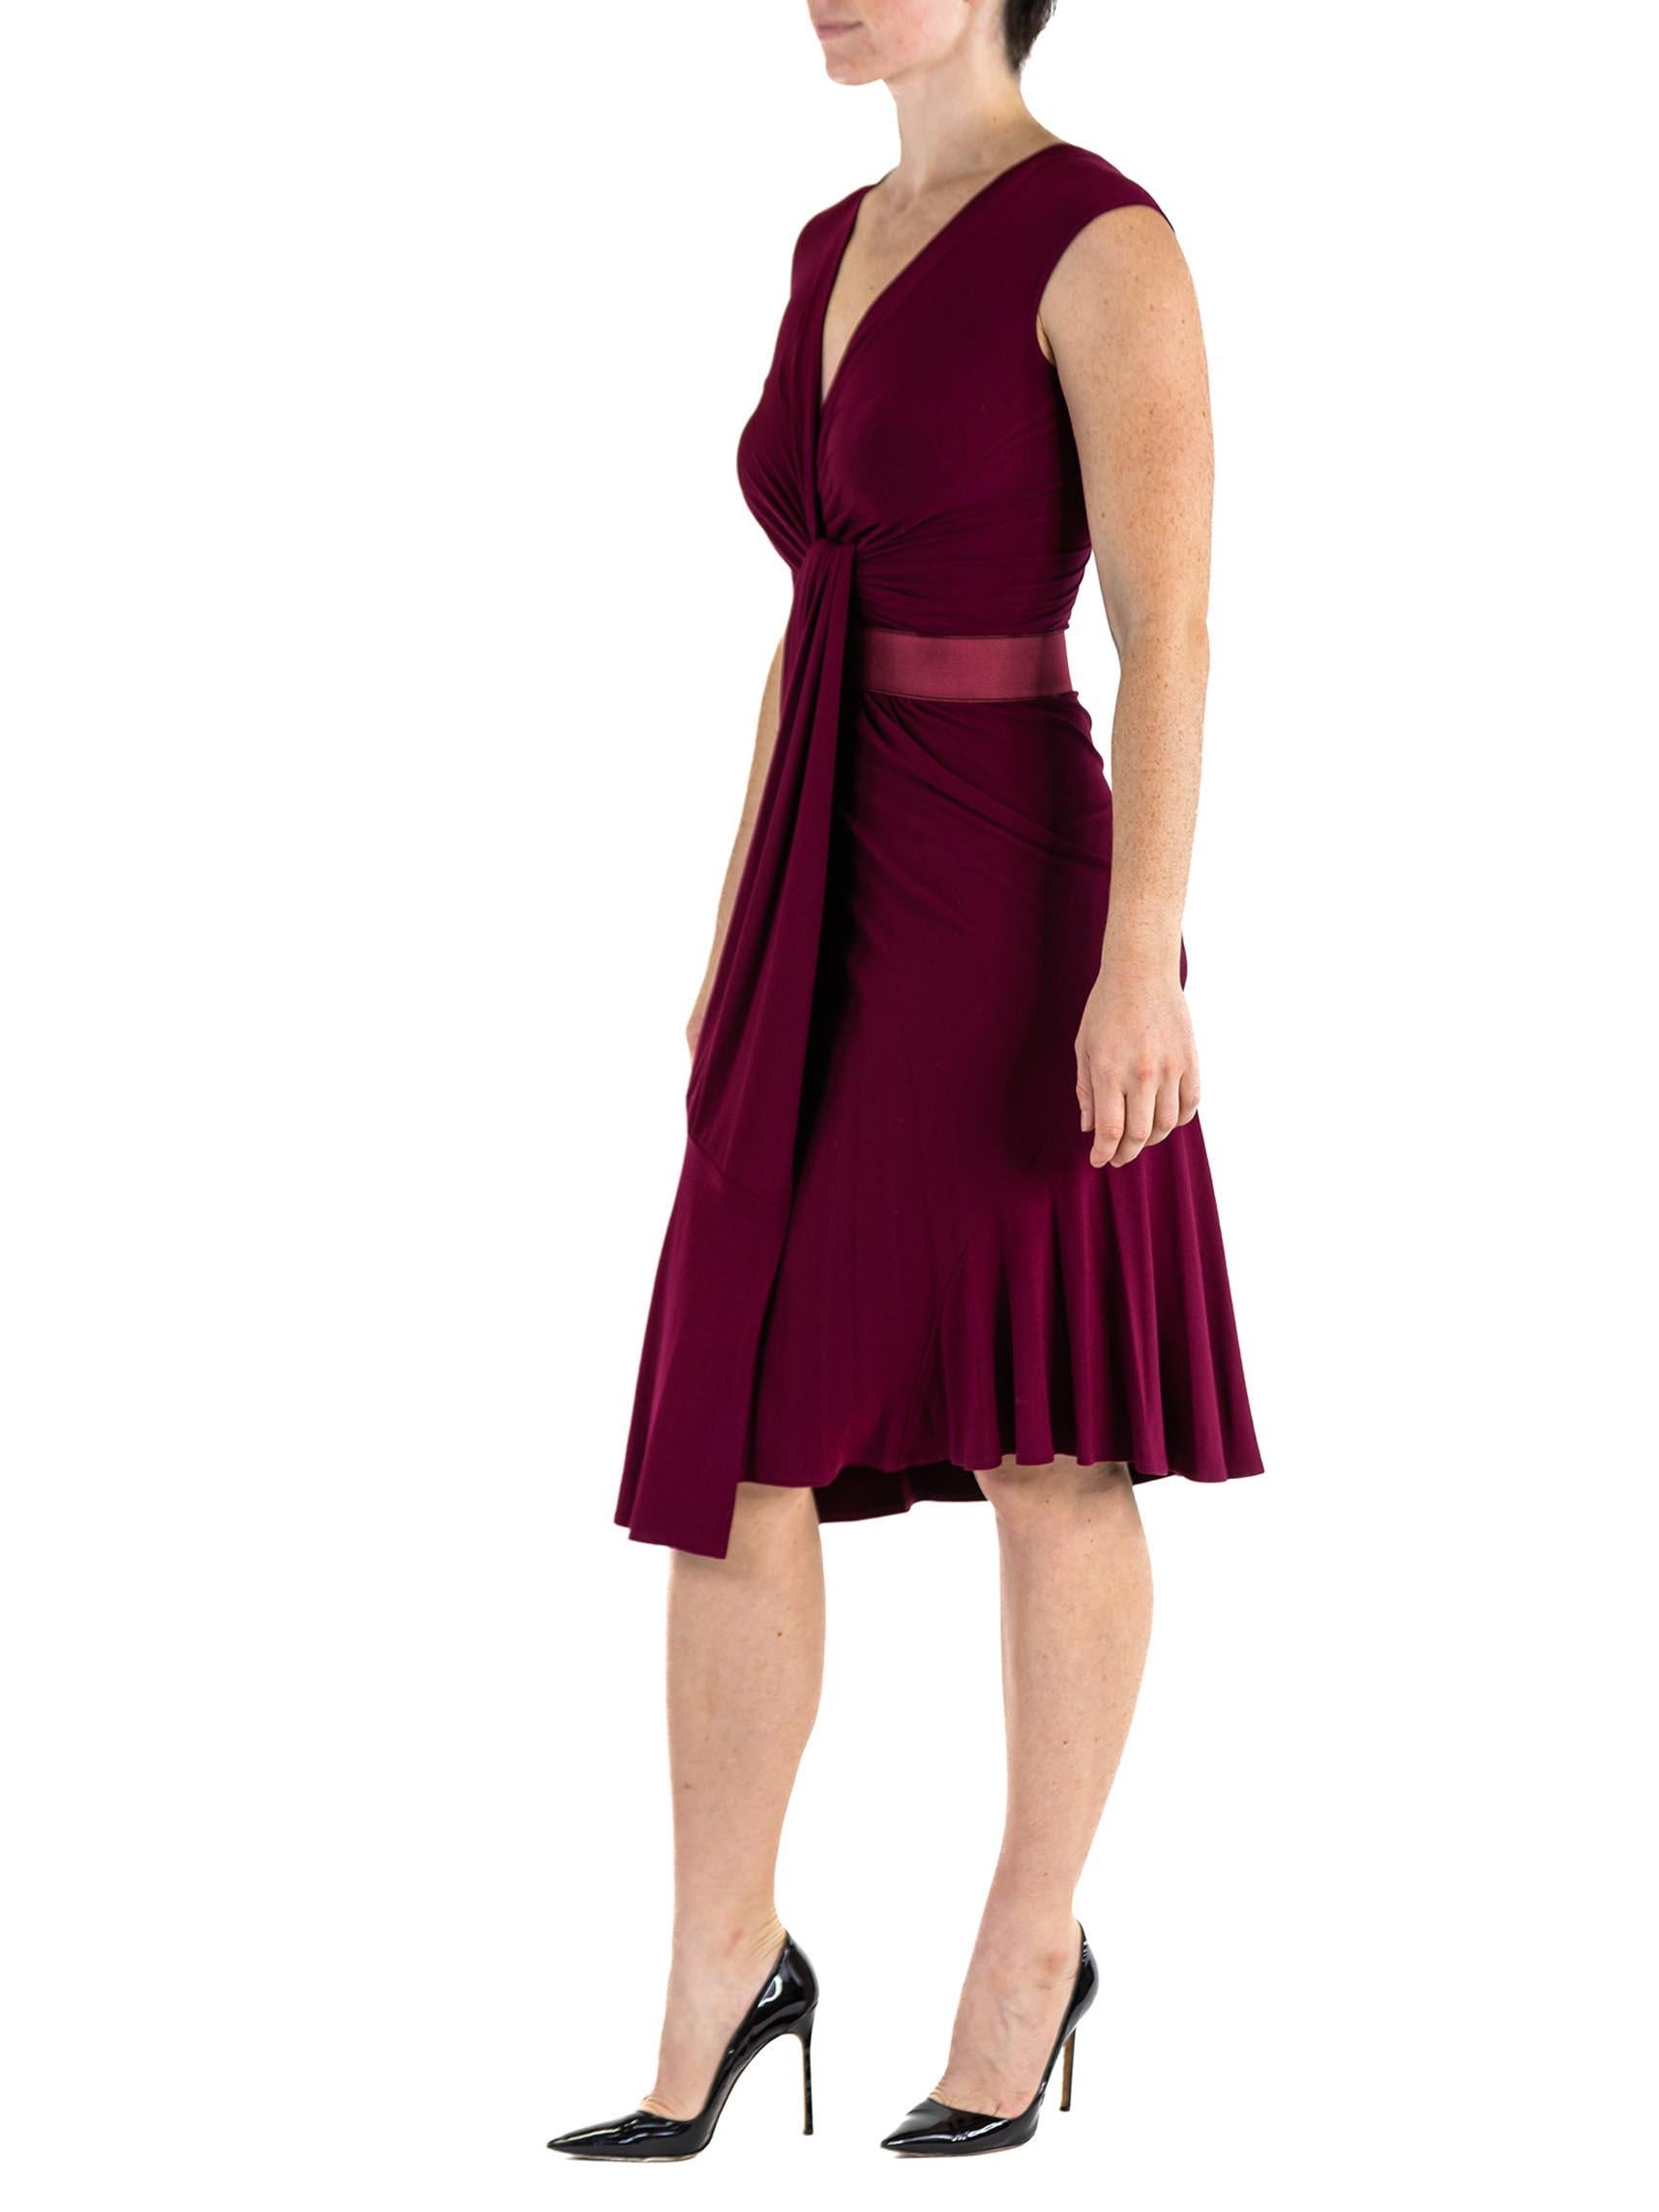 2000S DONNA KARAN Garnet Red Rayon Jersey Knot Front Ruched Dress With Belt In Excellent Condition For Sale In New York, NY